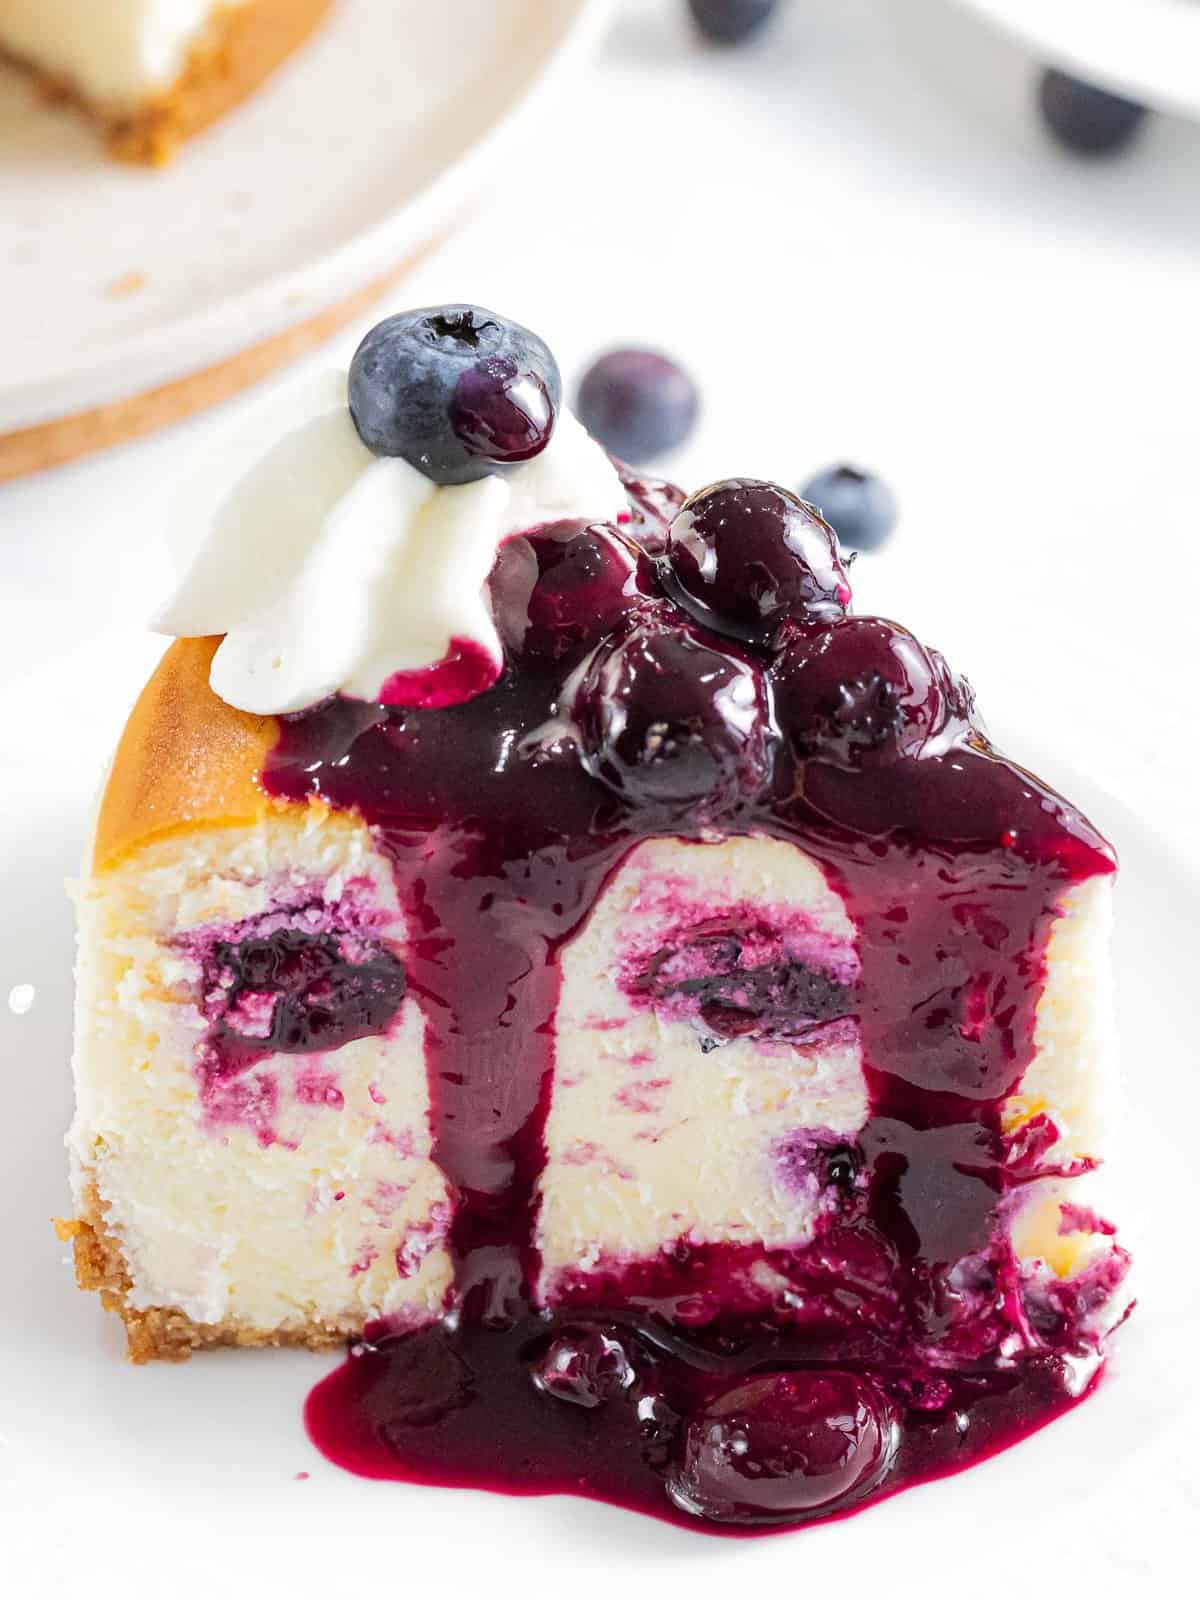 A slice of blueberry cheesecake made with fresh blueberries and topped with blueberry sauce.